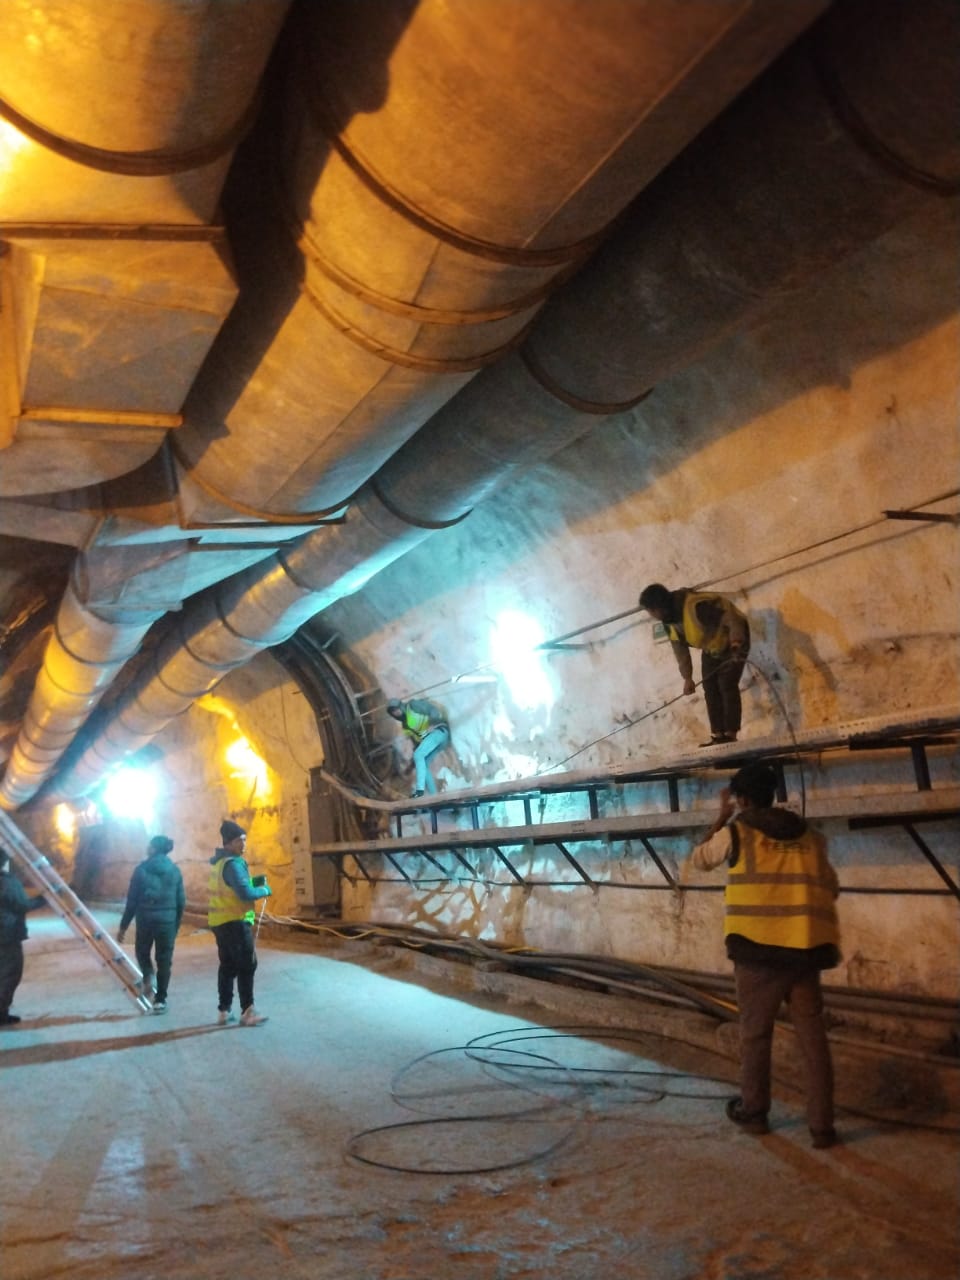 Fiber Optic Cable Installation in Nepal’s Tunnels